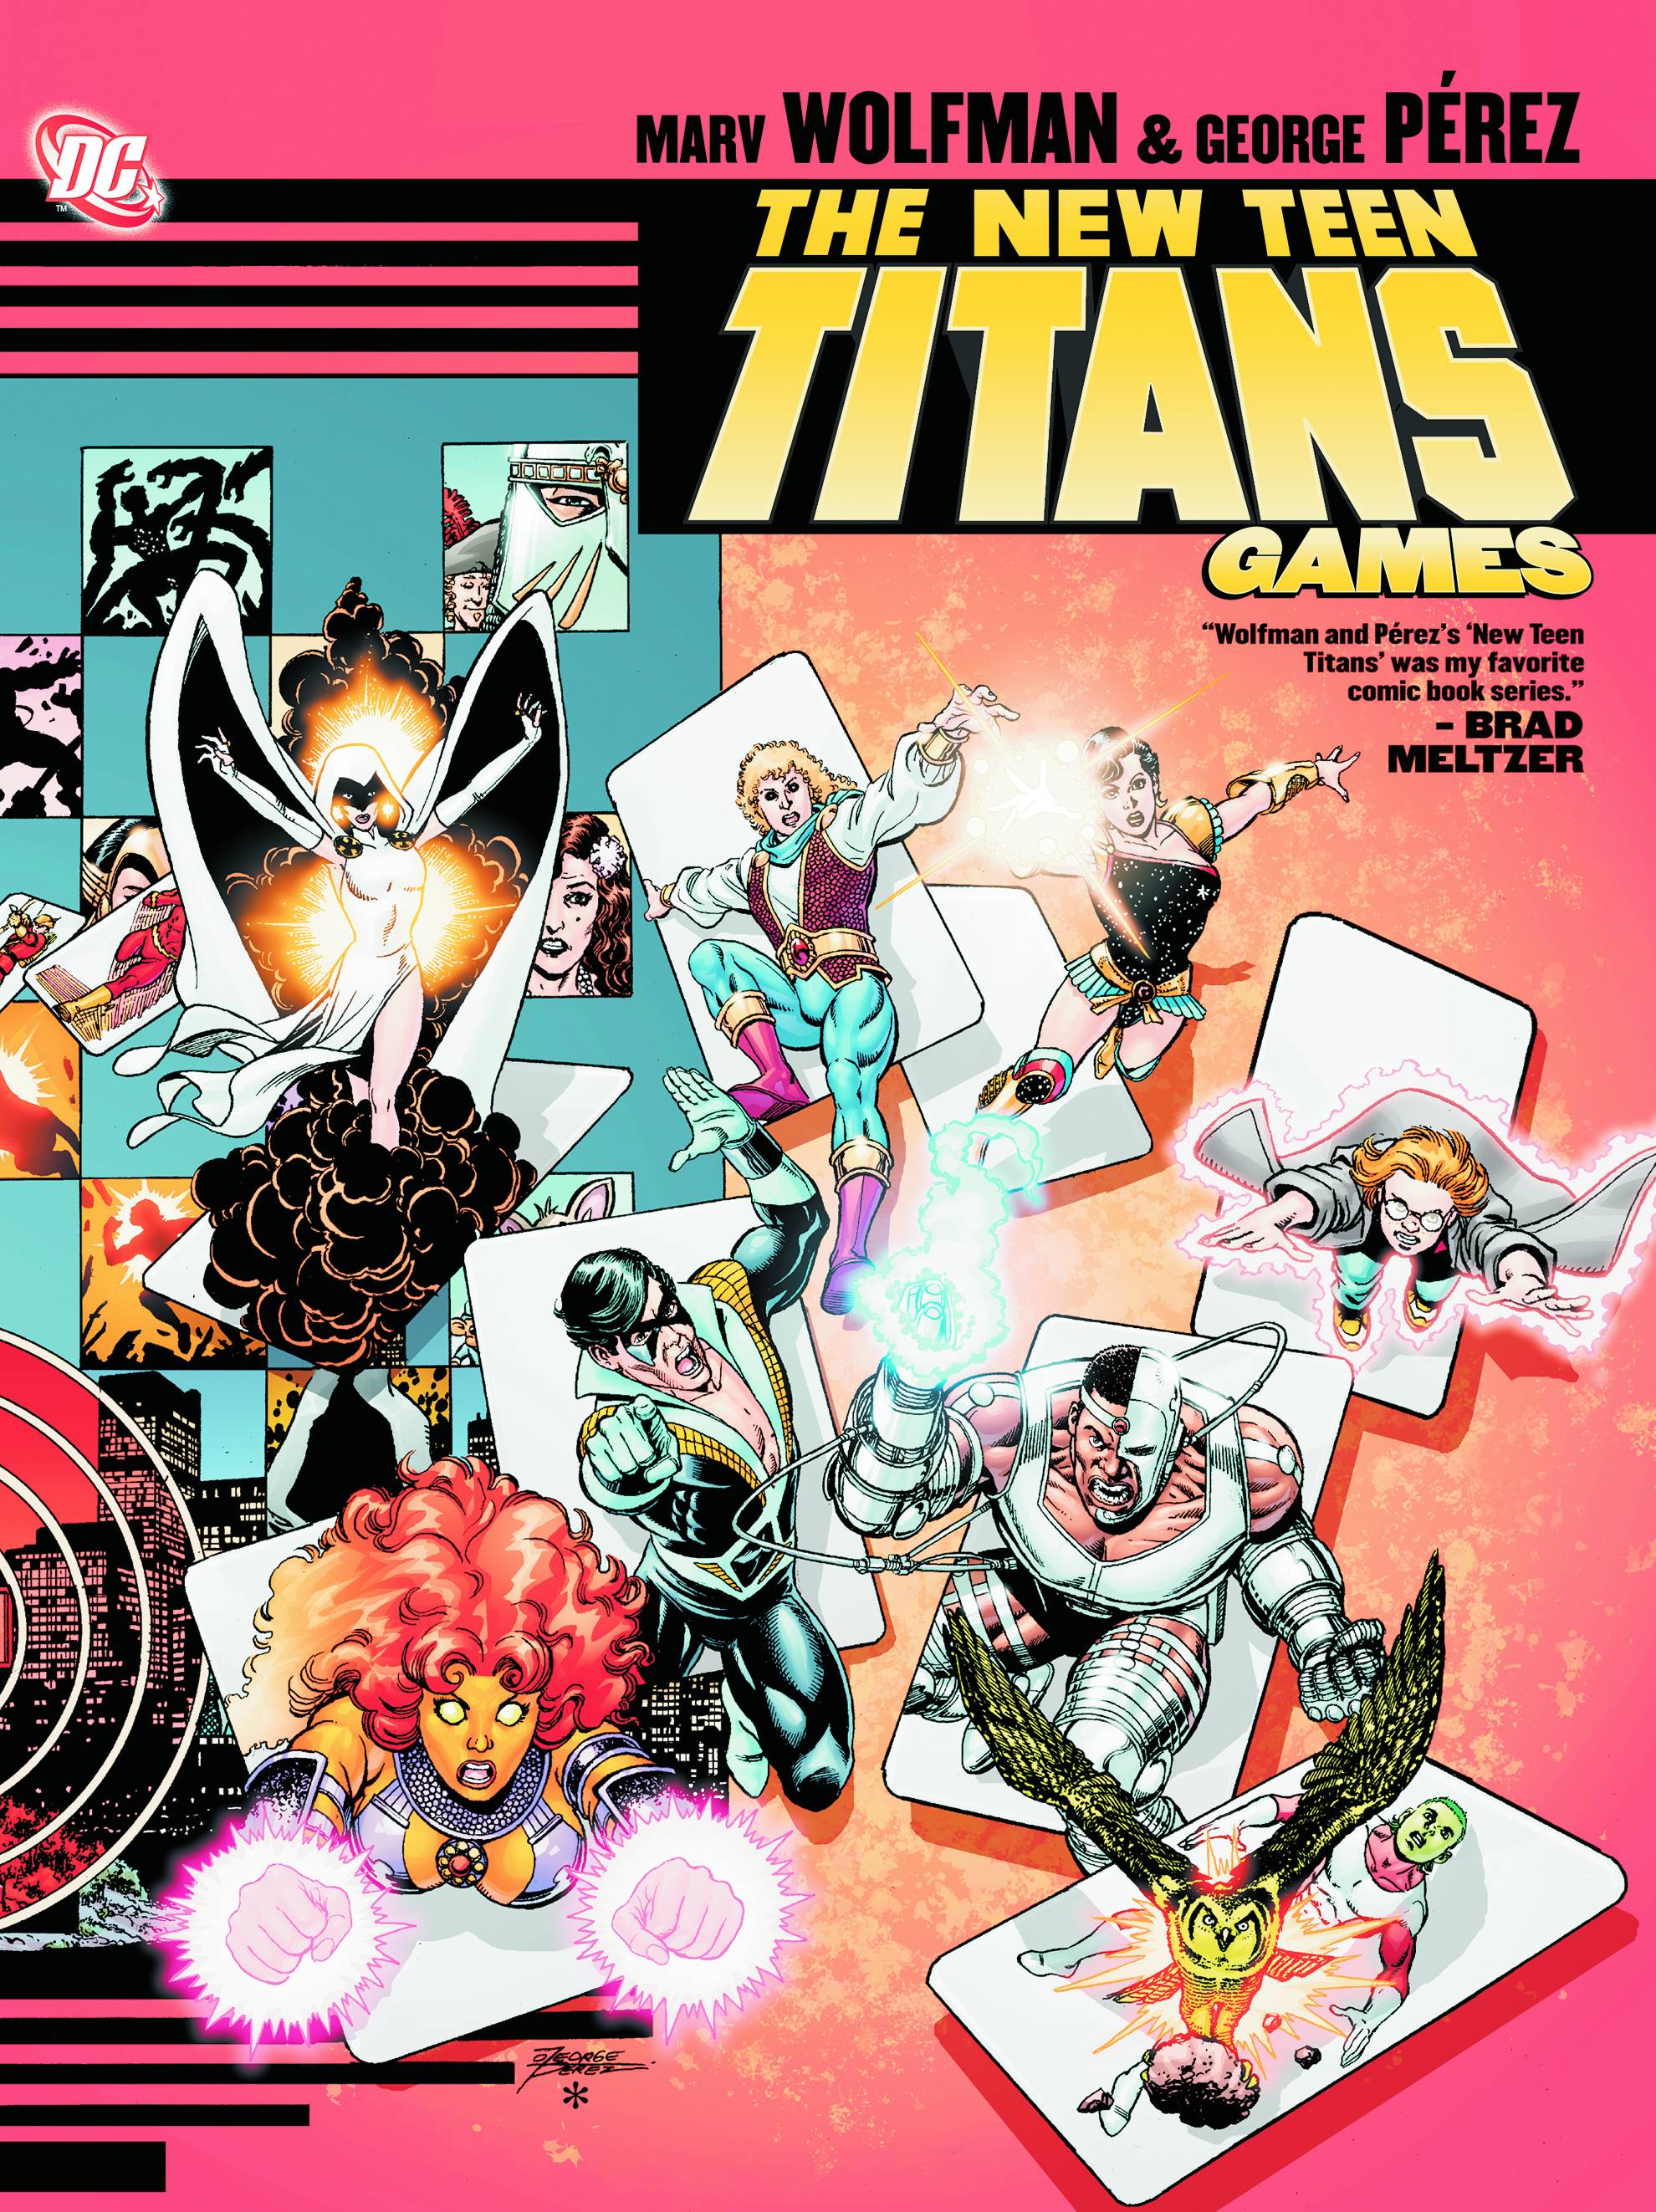 New Teen Titans Games Hardcover